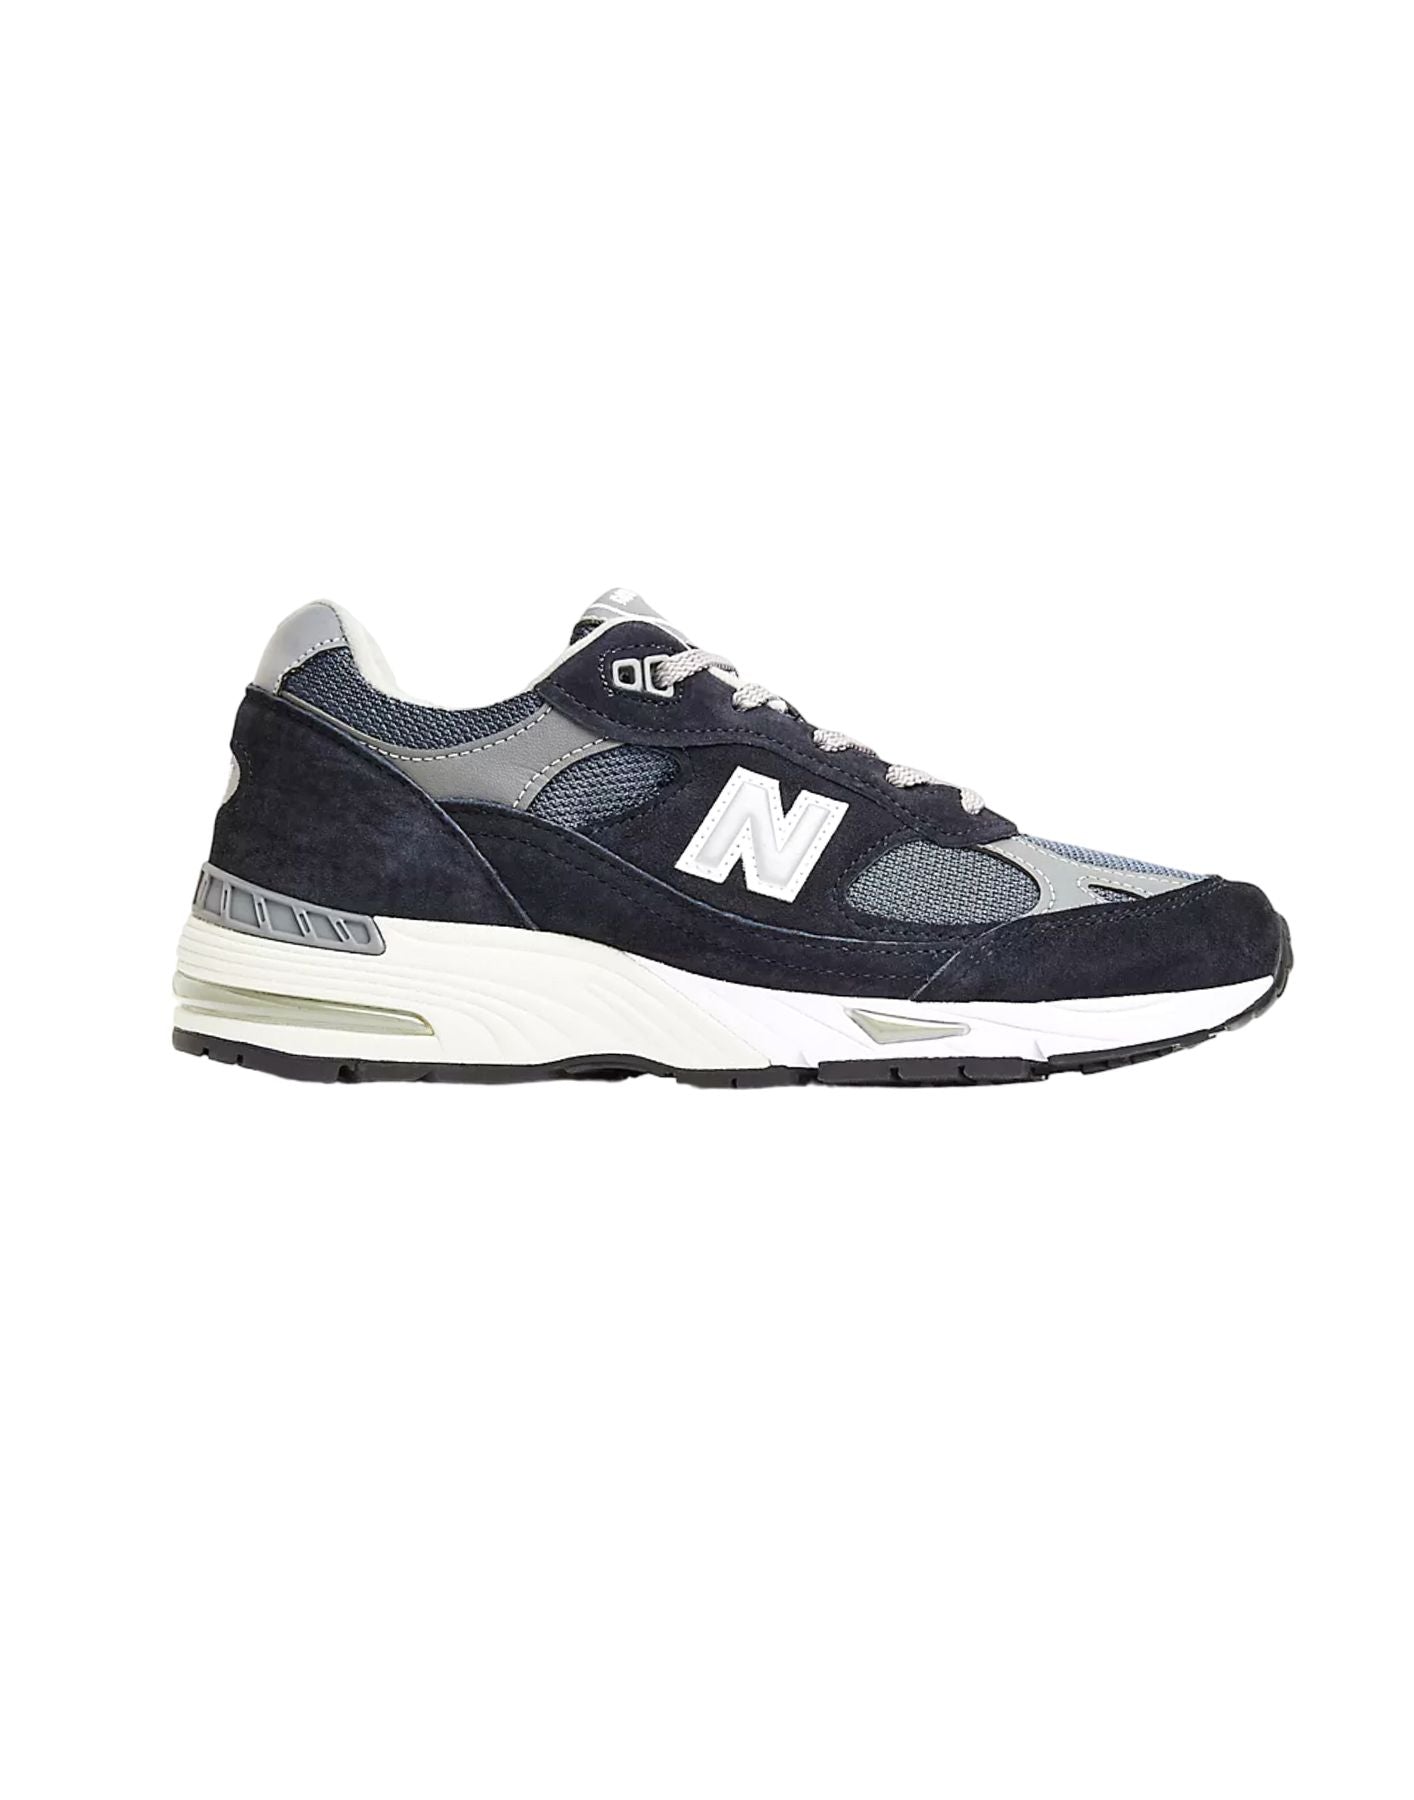 Chaussures pour femme w991nv NEW BALANCE